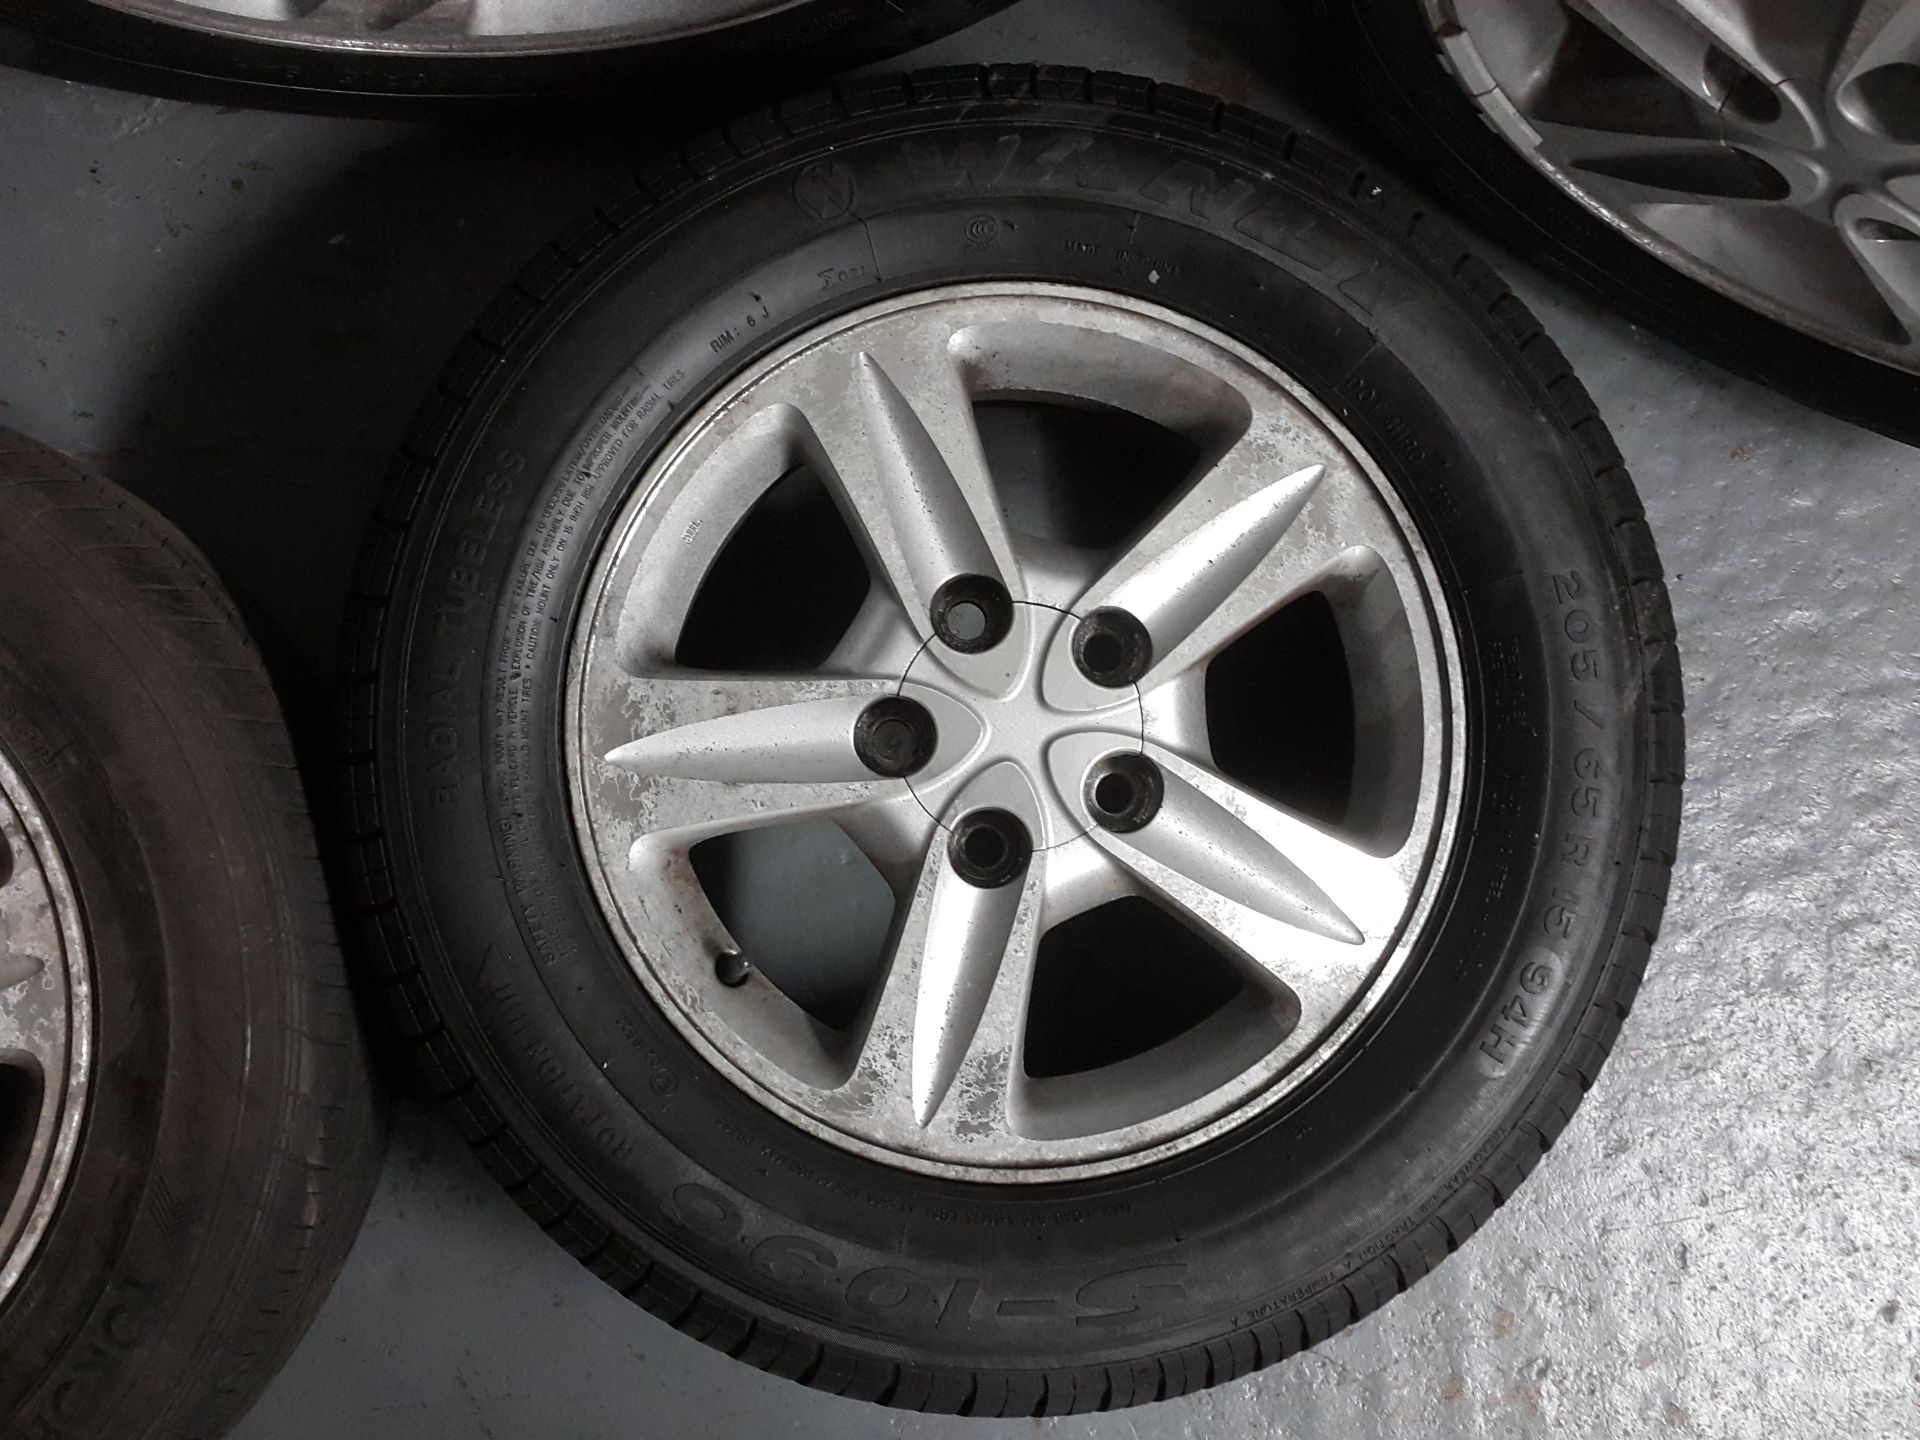 5 X TOYOTA PREVIA 15" ALLOY WHEELS WITH TYRES 205/65/15 (2 GOODYEAR 2 OTHERS) - Image 8 of 11